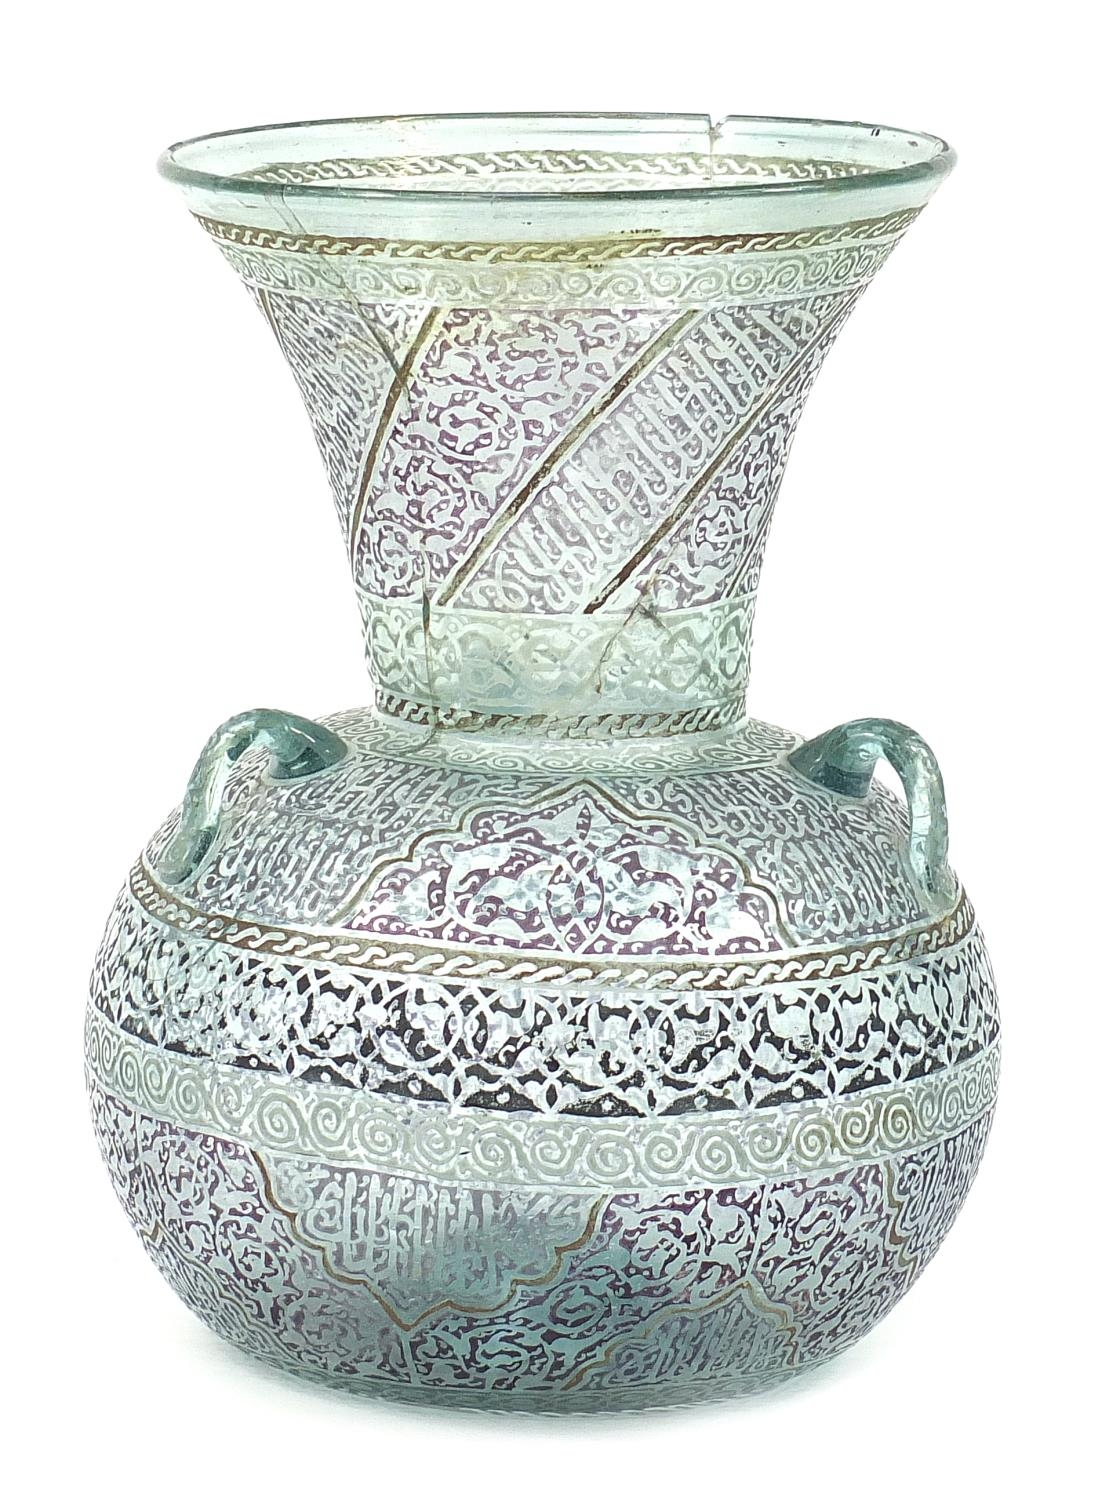 Antique Islamic Mamluk Revival glass mosque lantern engraved with calligraphy and flowers, 31.5cm